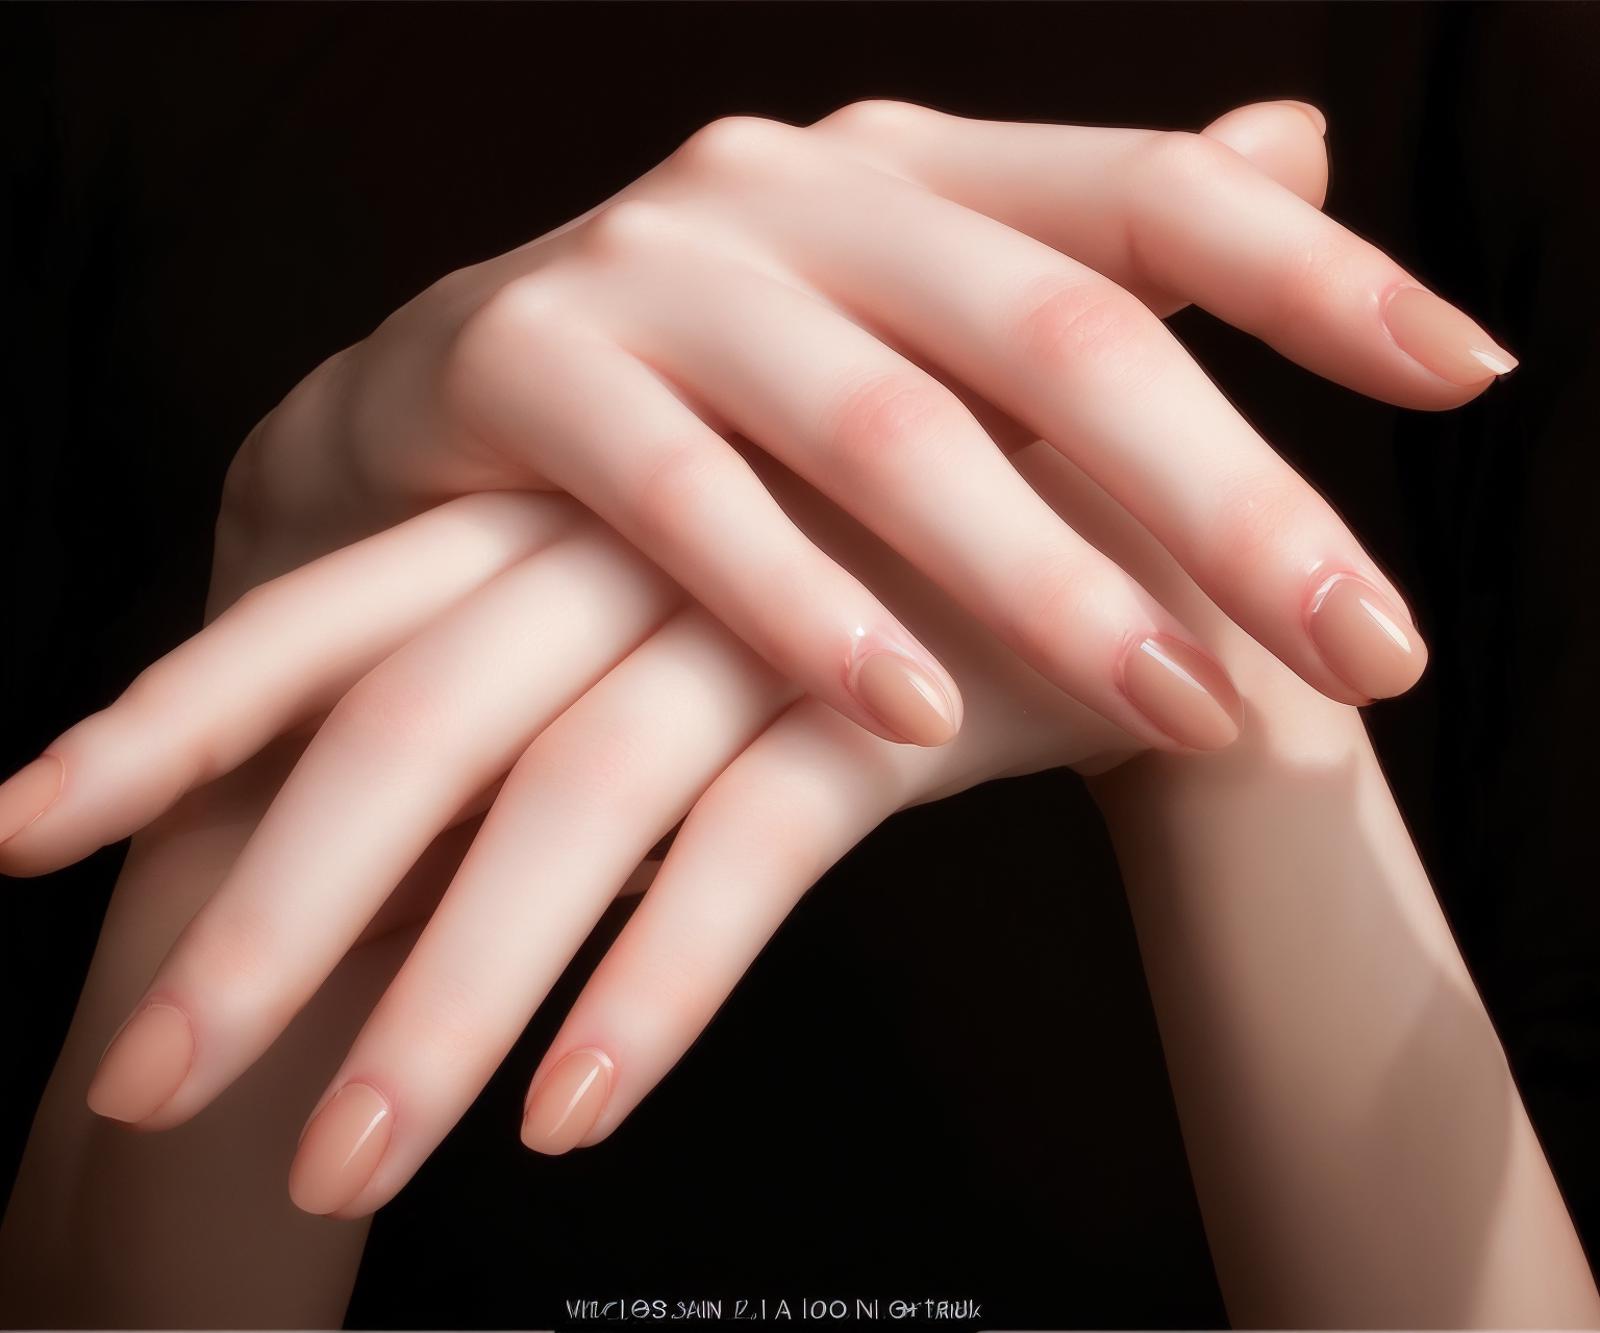 male hand-hands-22 image by wrcui8649975